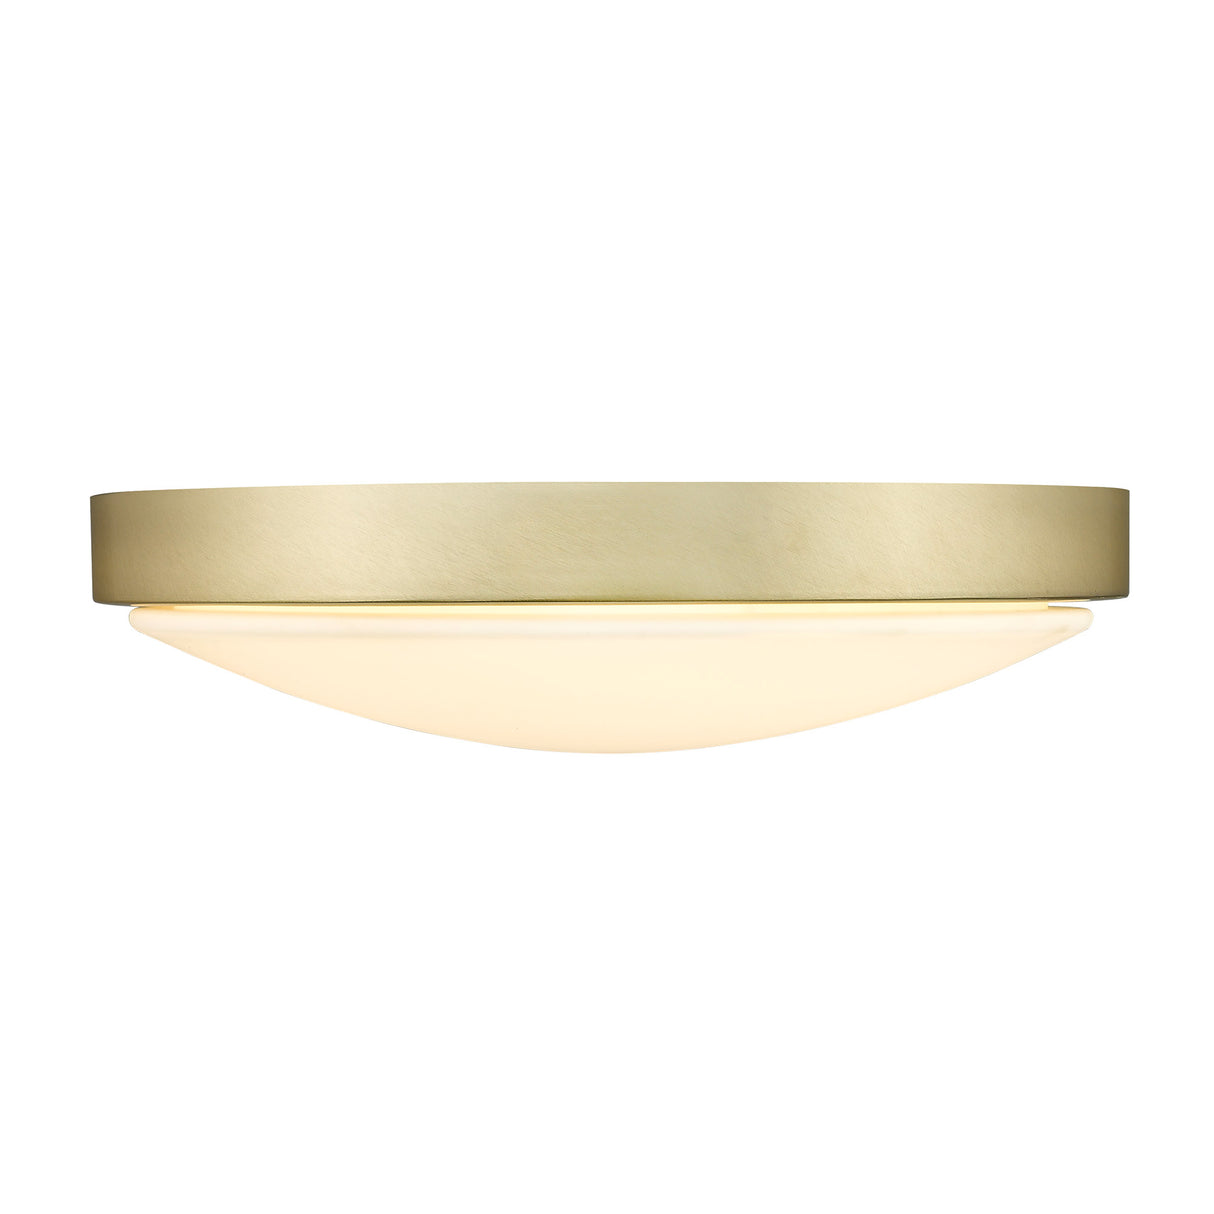 Gabi 13" Flush Mount in Brushed Champagne Bronze with Opal Glass